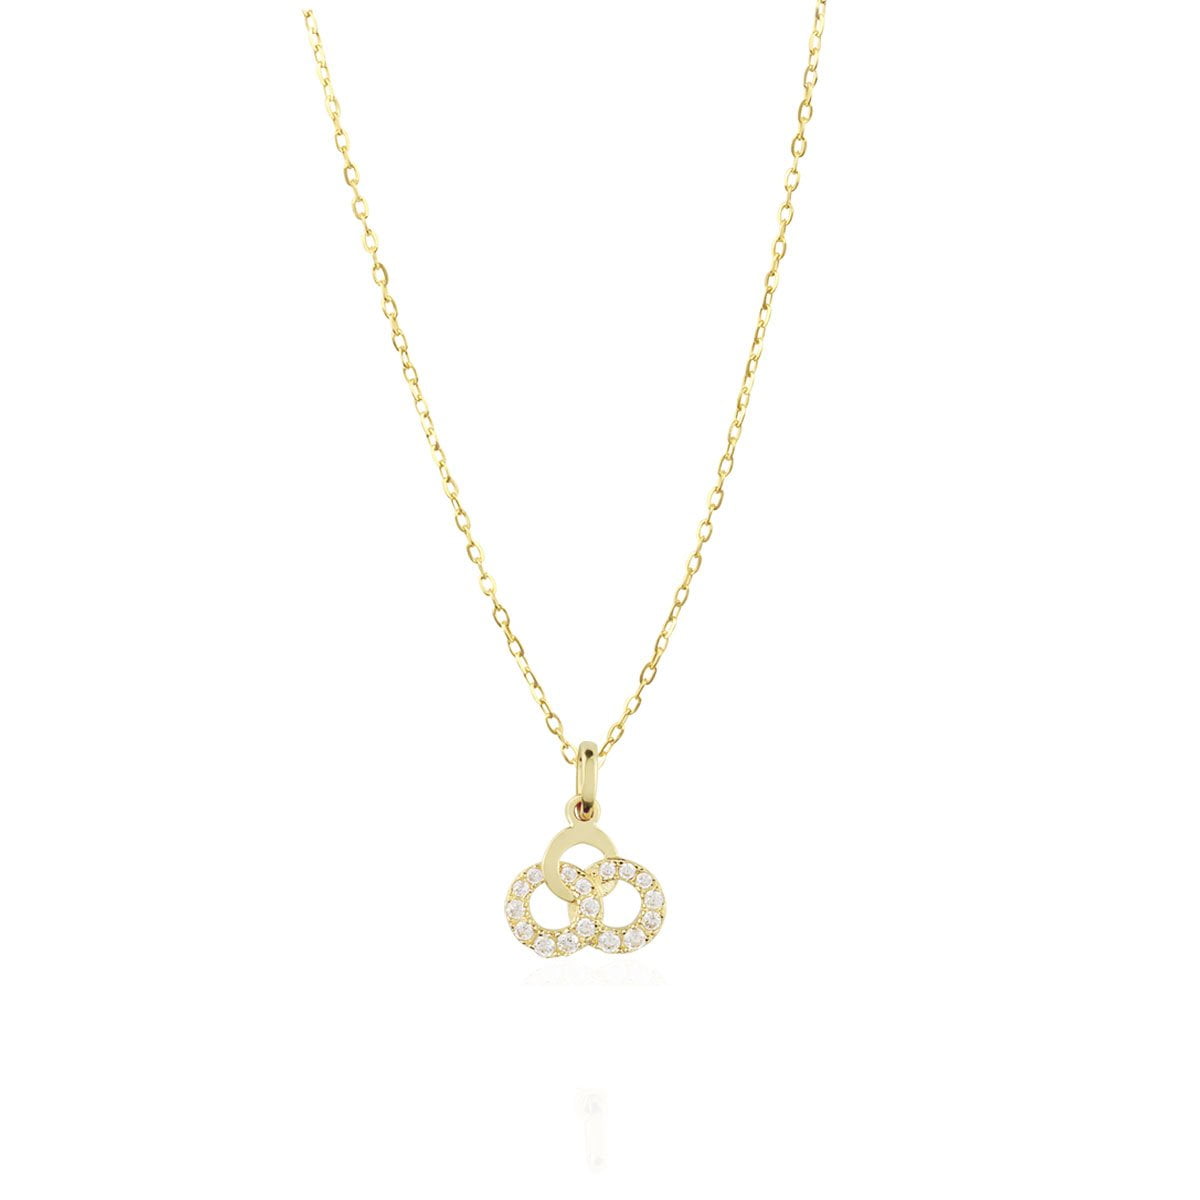 Gia Dream 18ct Gold Pendant Charm With A Gold Chain